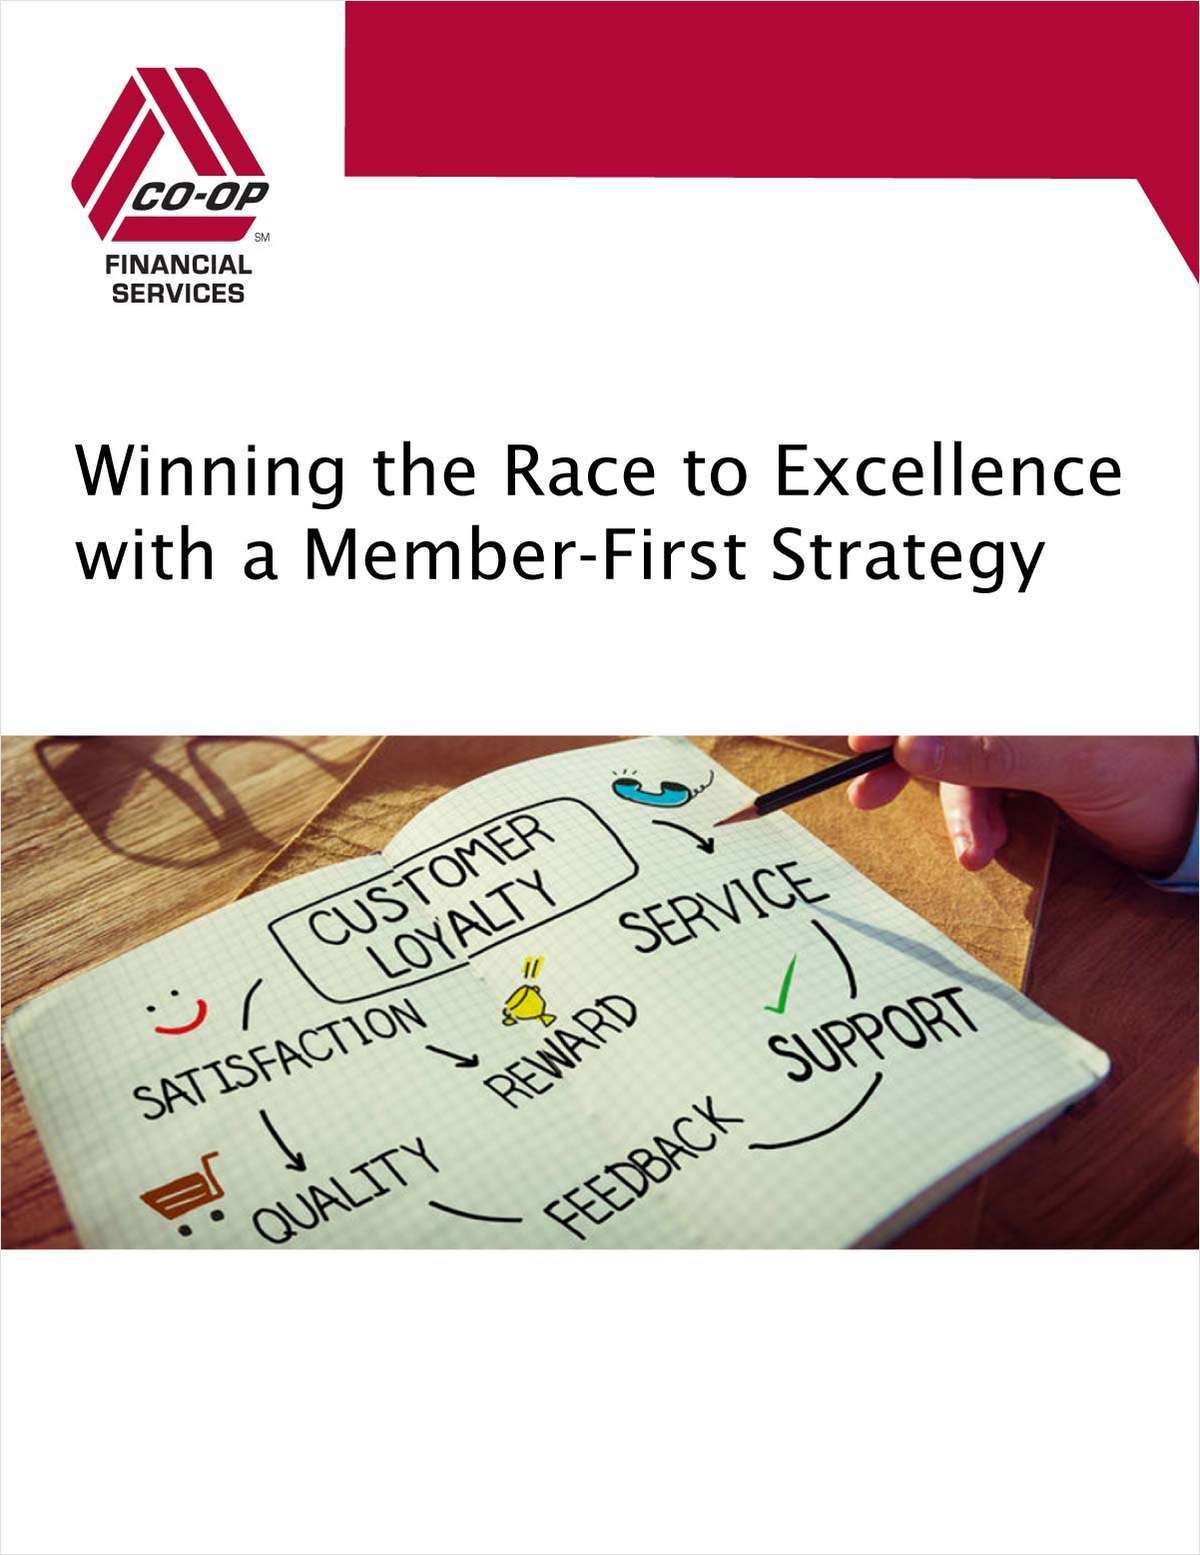 Winning the Race to Excellence with a Member-First Strategy